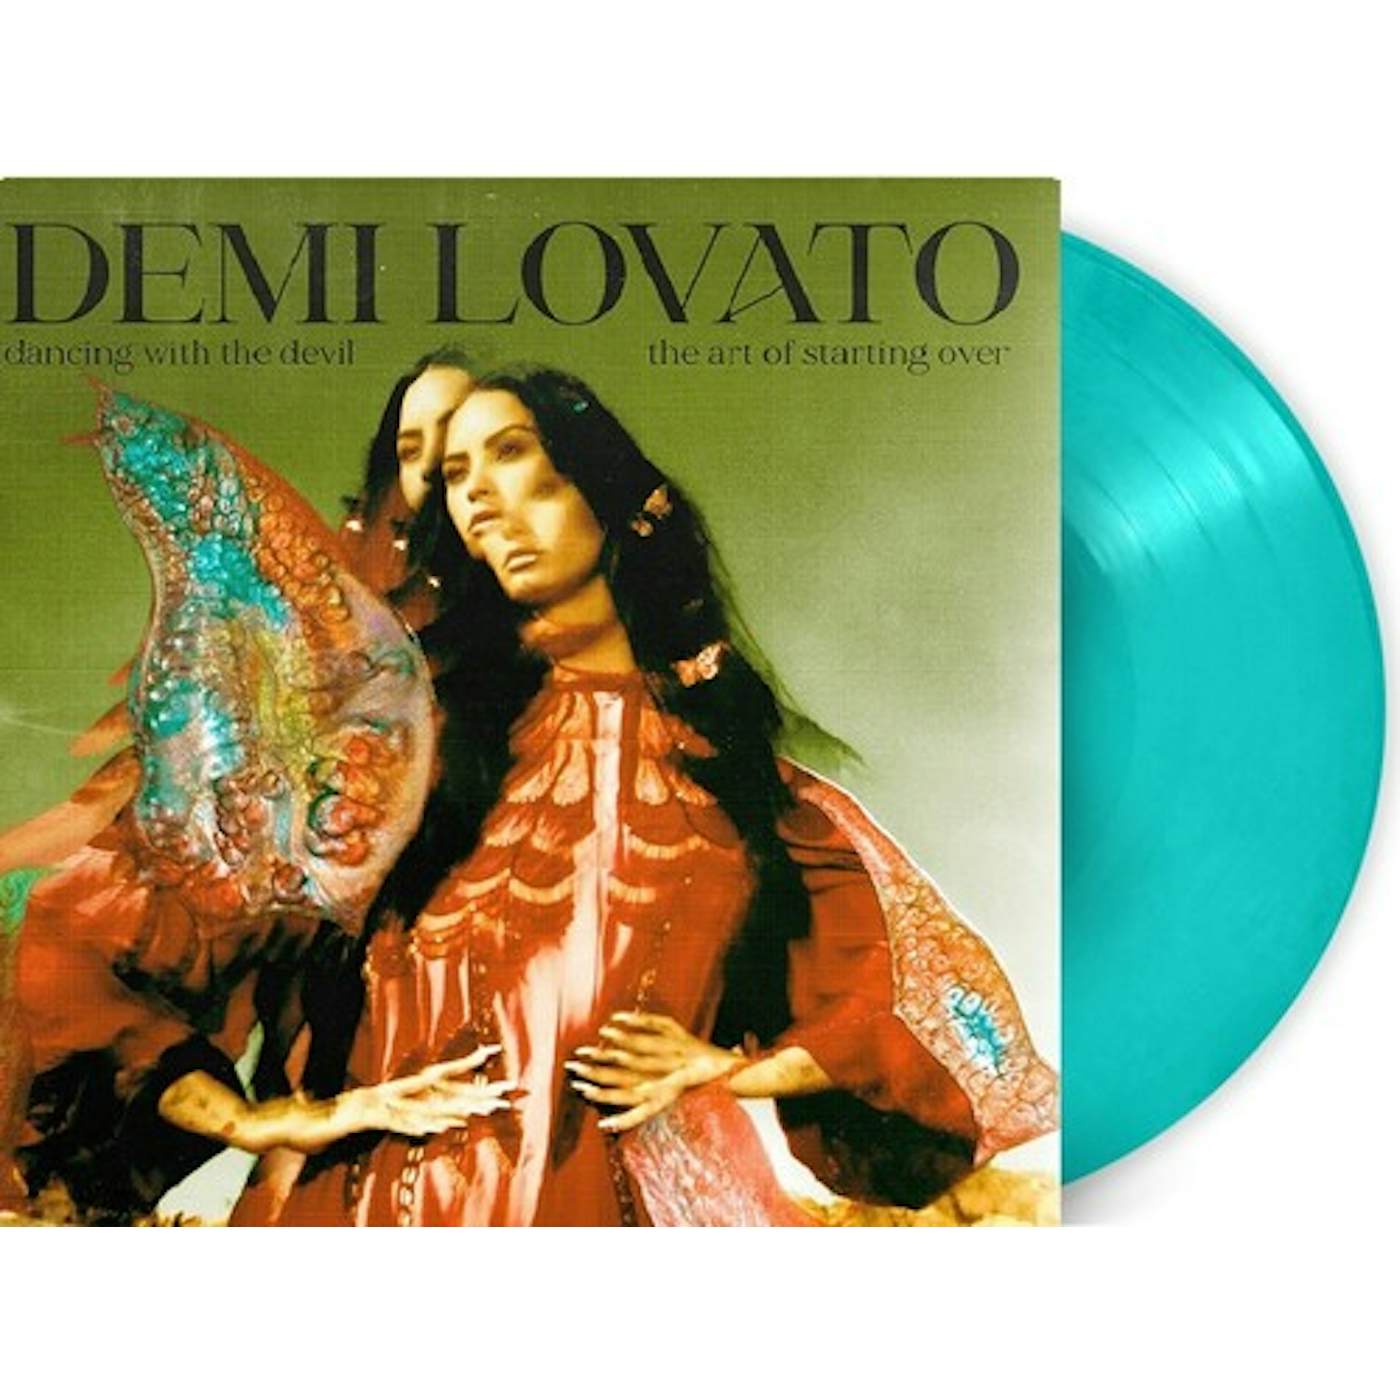 Demi Lovato Dancing With The Devil: Art Os Starting Over Vinyl Record